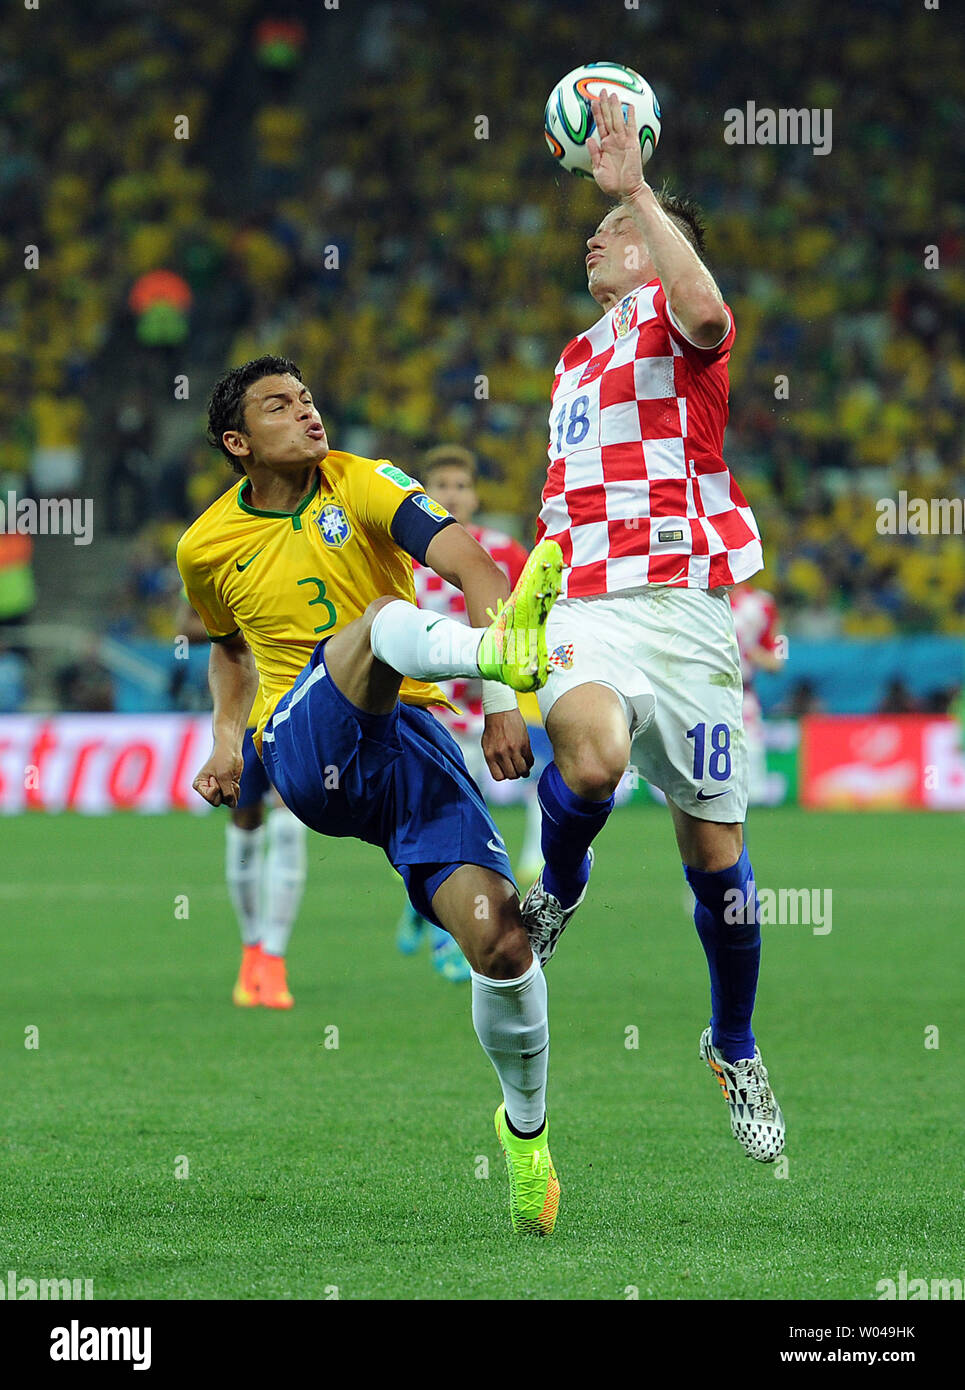 Thiago Silva (L) of Brazil in action with Ivica Olic of Croatia during the 2014 FIFA World Cup Group A match at the Arena Corinthians in Sao Paulo, Brazil on June 12, 2014. UPI/Chris Brunskill Stock Photo